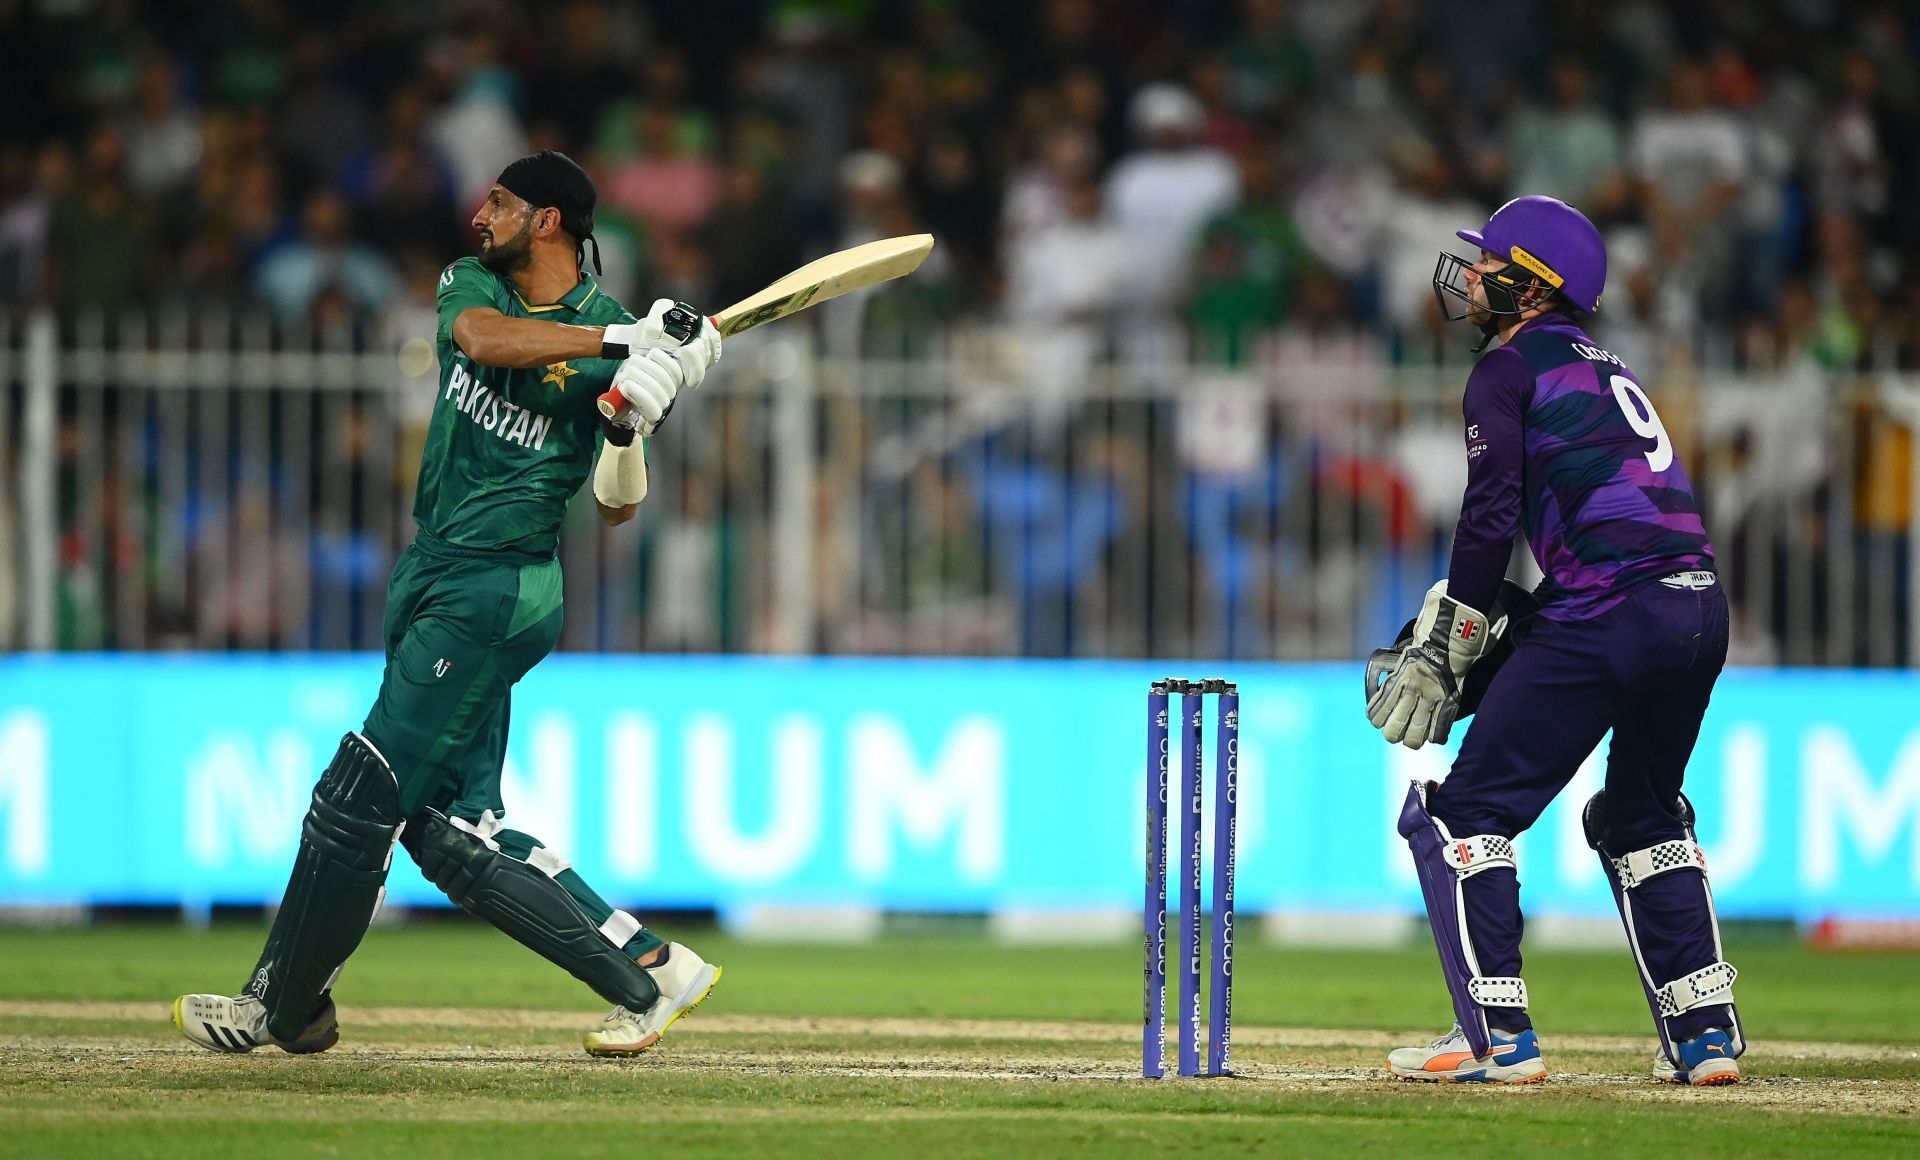 Shoaib Malik is the most-capped player for Pakistan in T20Is. (Credits: Getty)